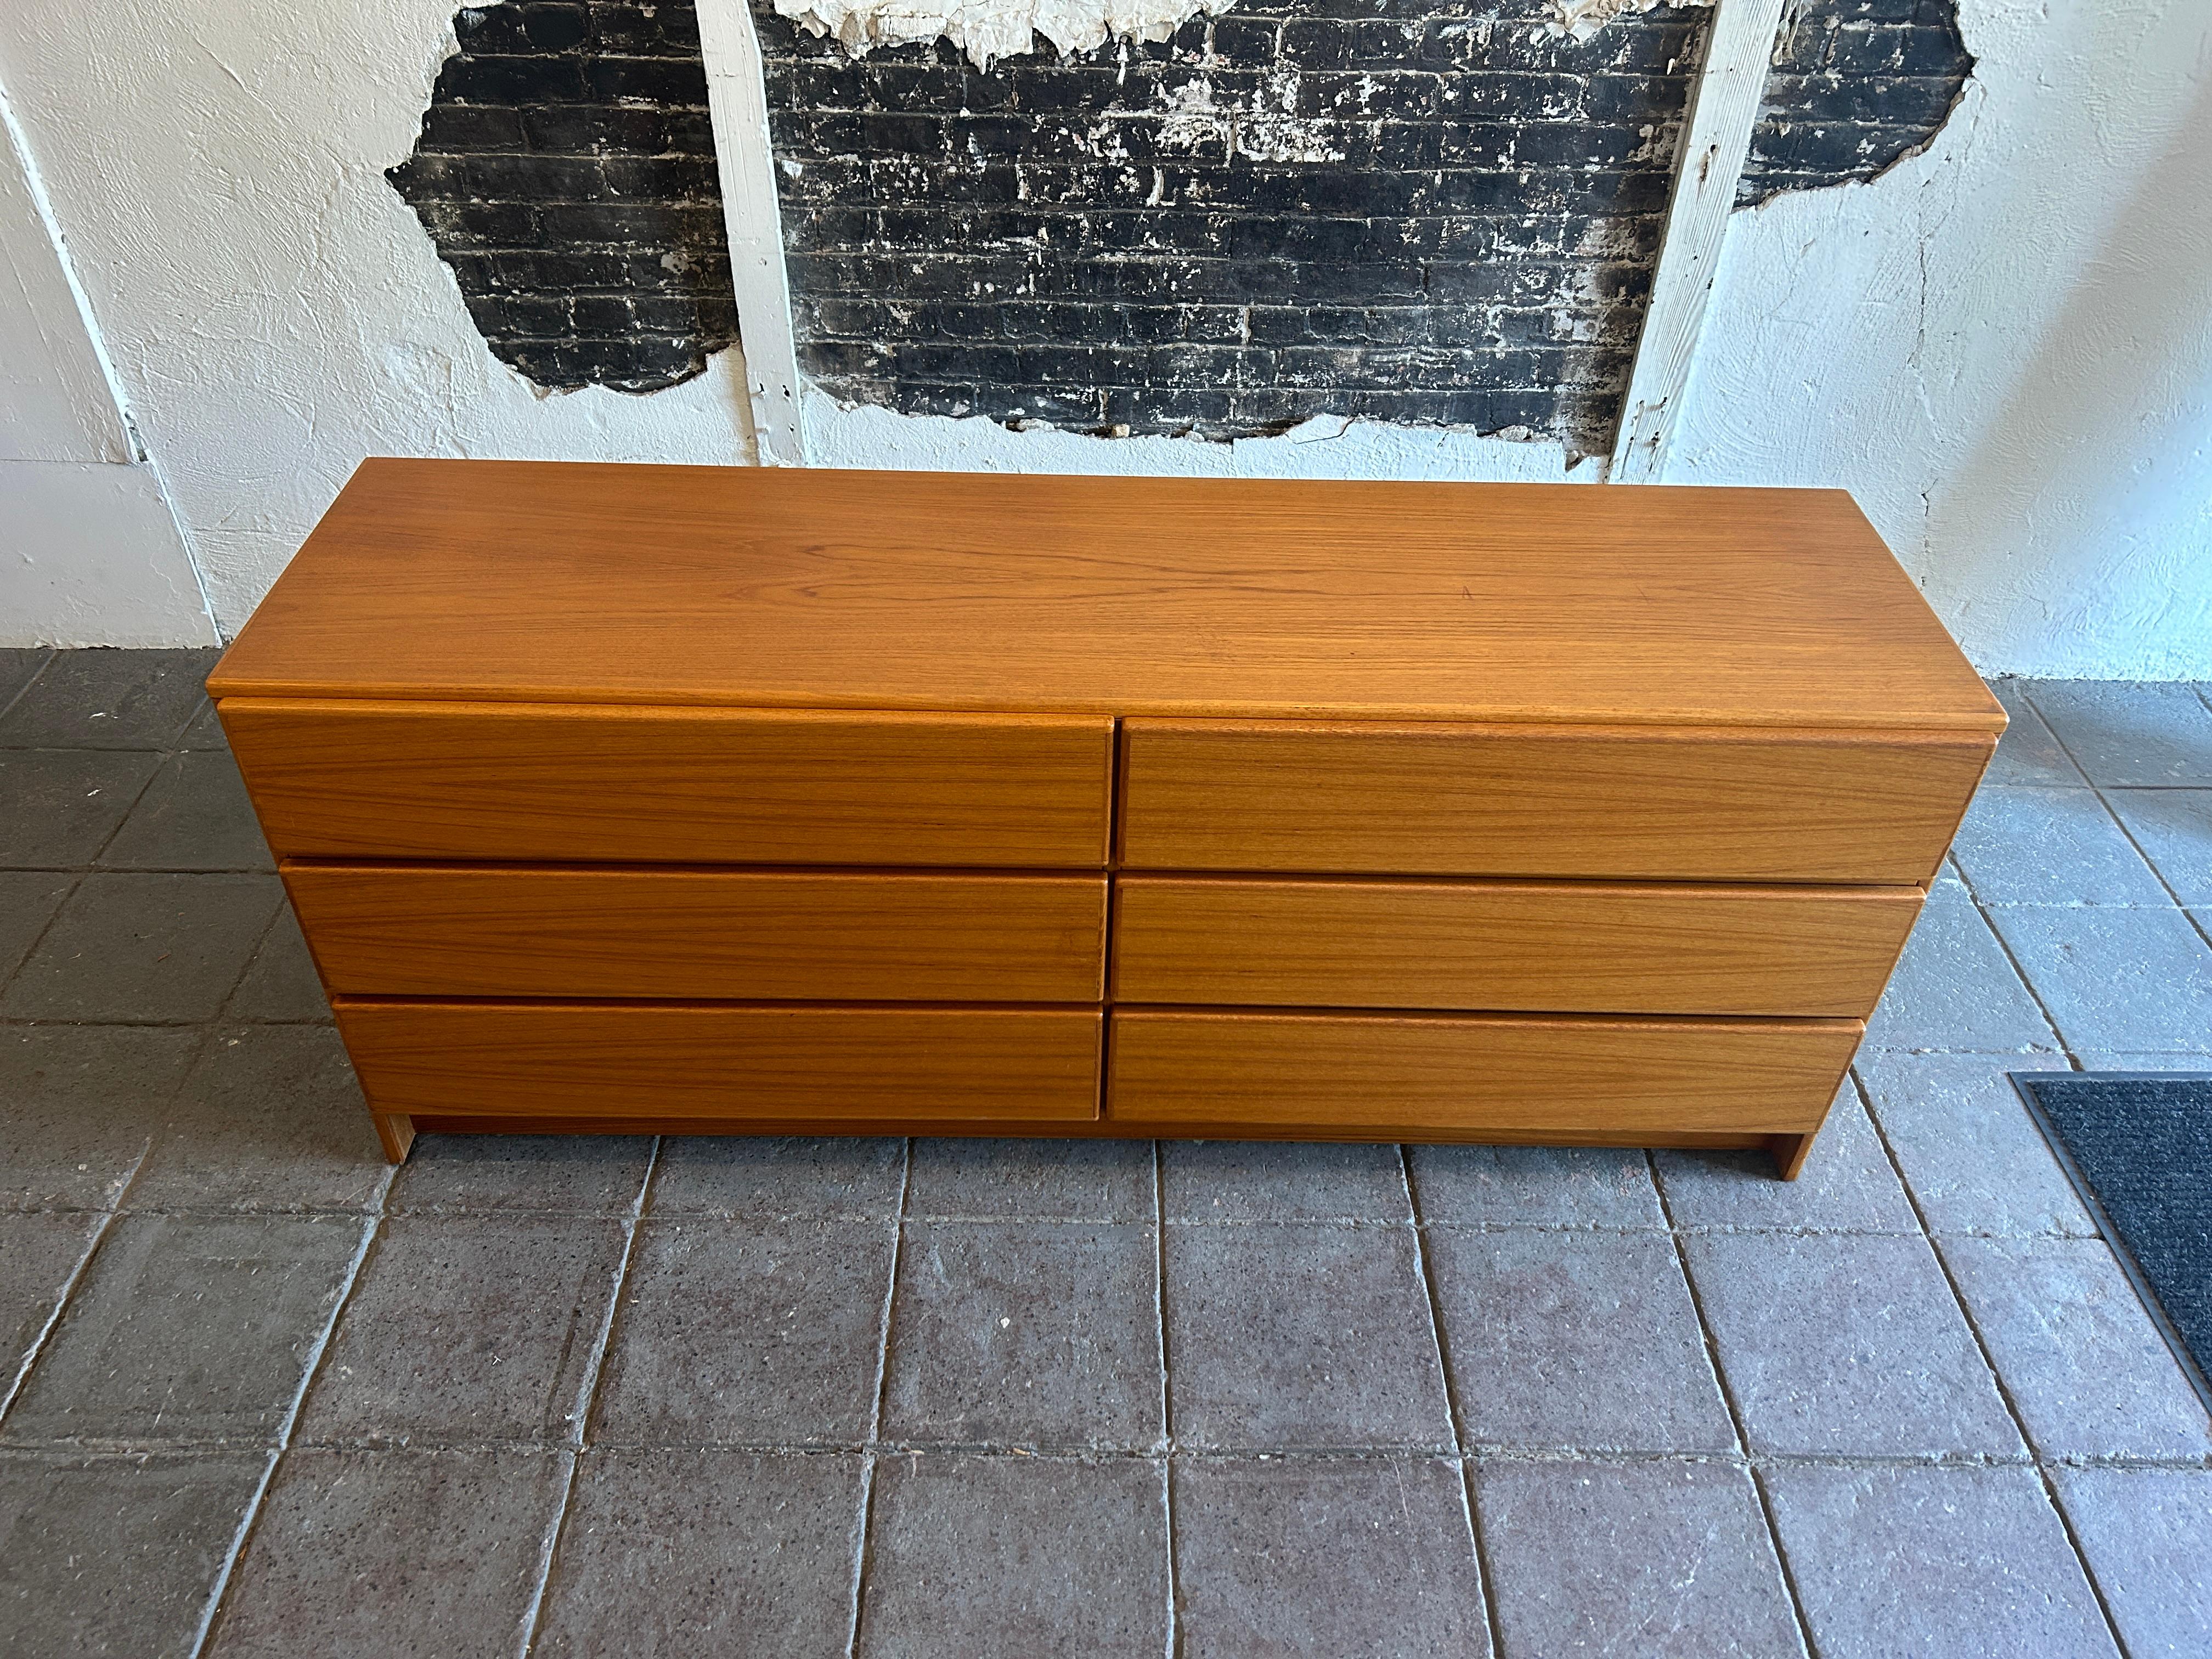 Midcentury Danish Modern 6 drawer teak dresser or credenza. Beautiful light teak with a simple stunning grain. All drawers clean inside and out as well as slide smooth on drawer tracks. Top left drawer has a sliding jewelry drawer. Simple symmetric